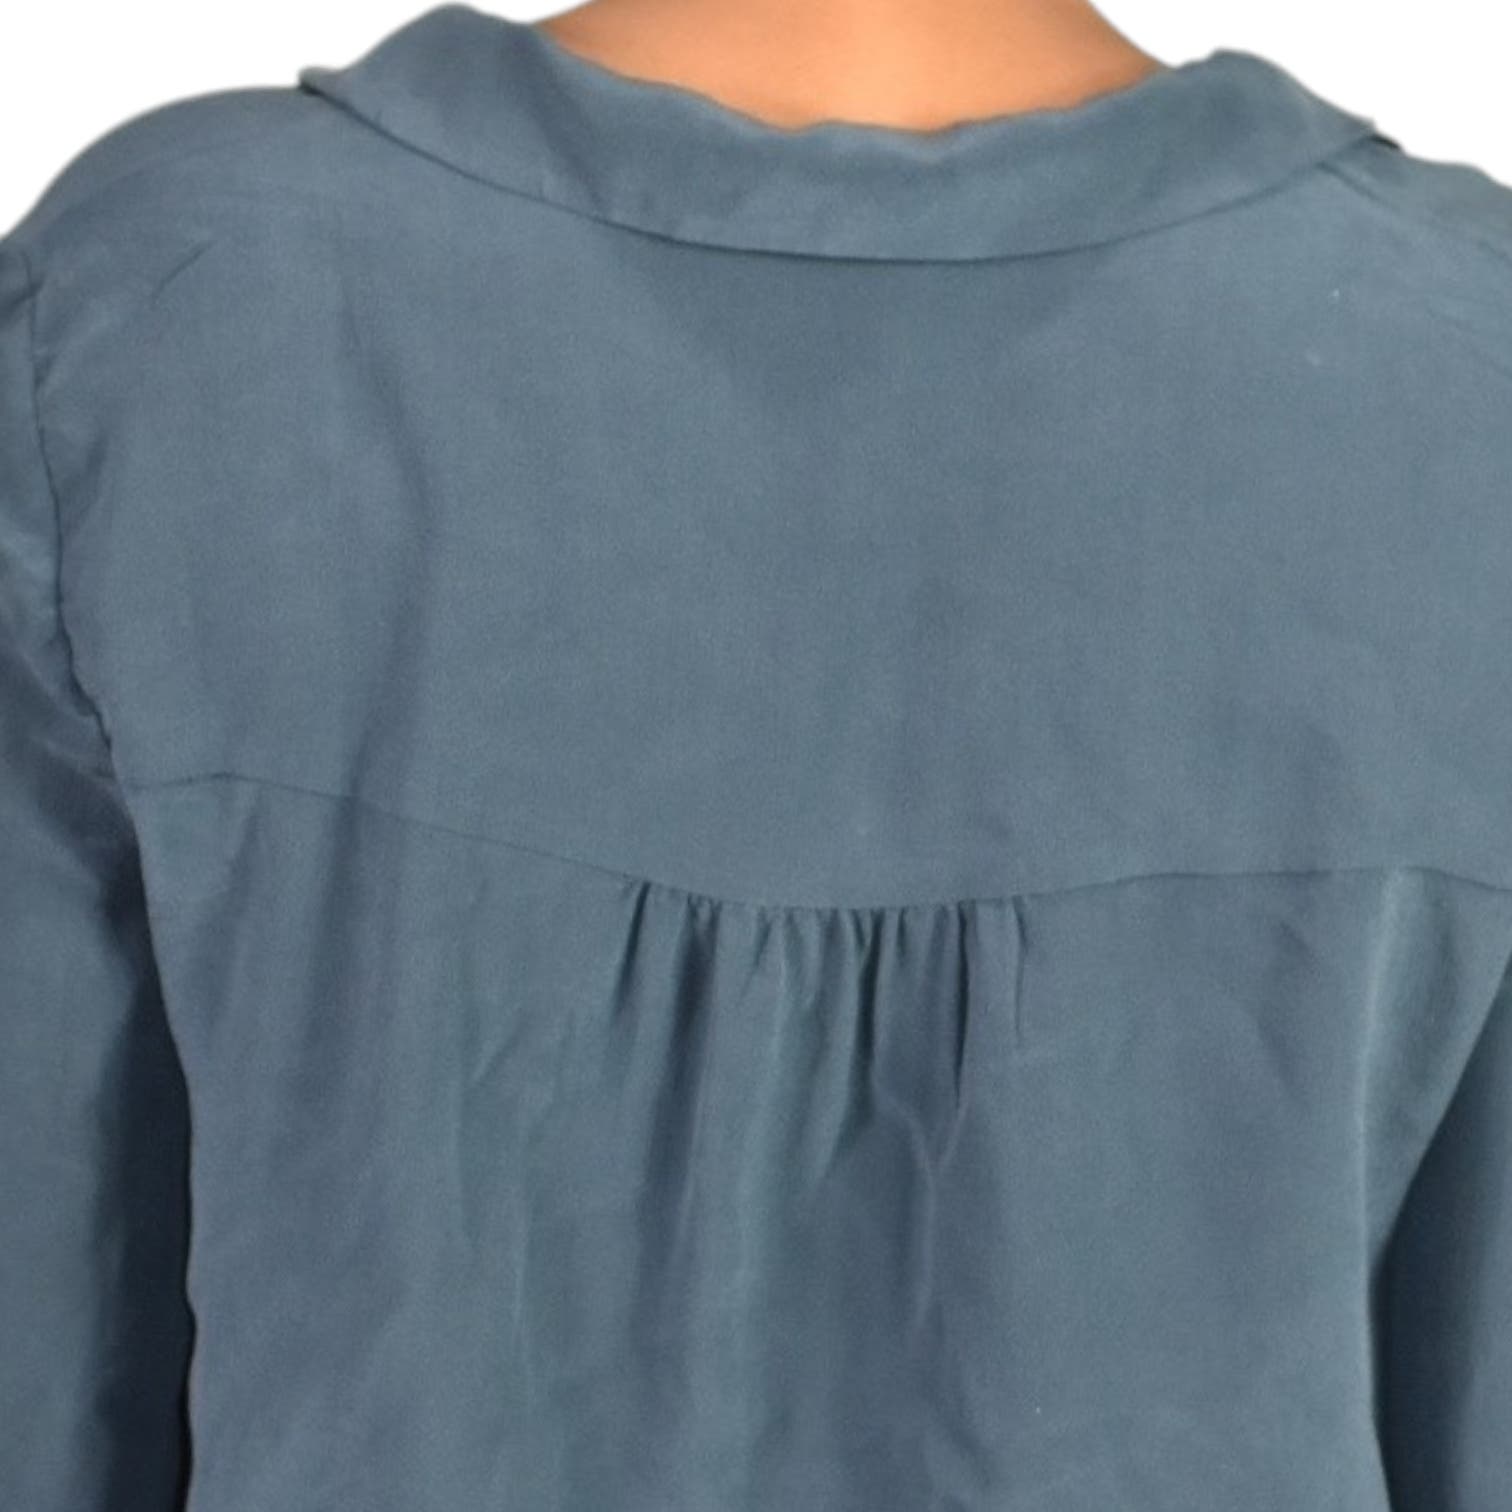 Wrap London Silk Blouse Blue Top Loose Fit Collared Tunic Shirt Muted Neutral Size 10